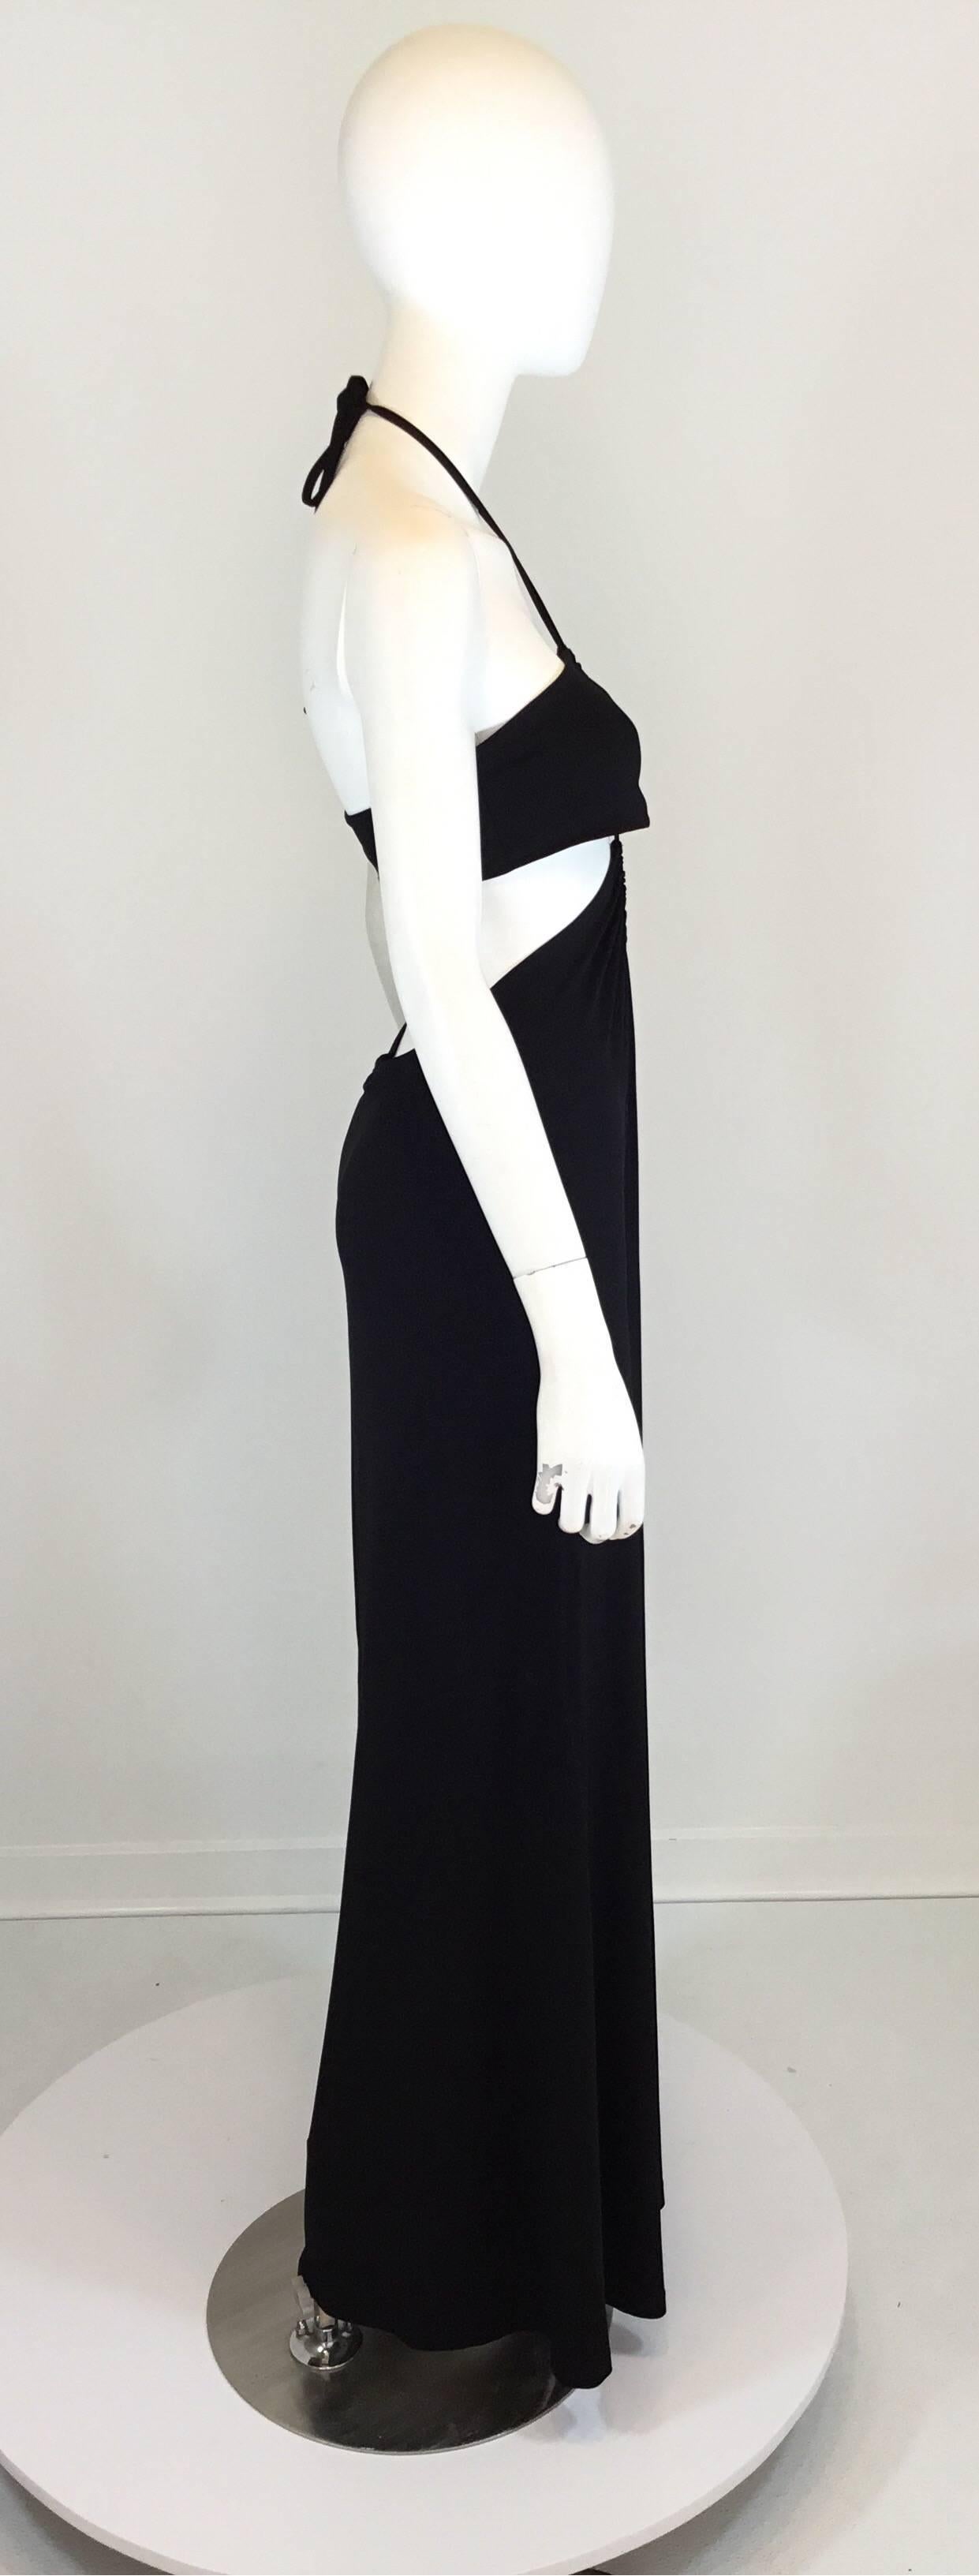 Celine cutout dress features a halter neck style and a cutout bodice detail. Made of 95% viscose and 5% elastane, size small, made in France. 

Garment has stretch:
bust 32'', waist 36'', length 50''